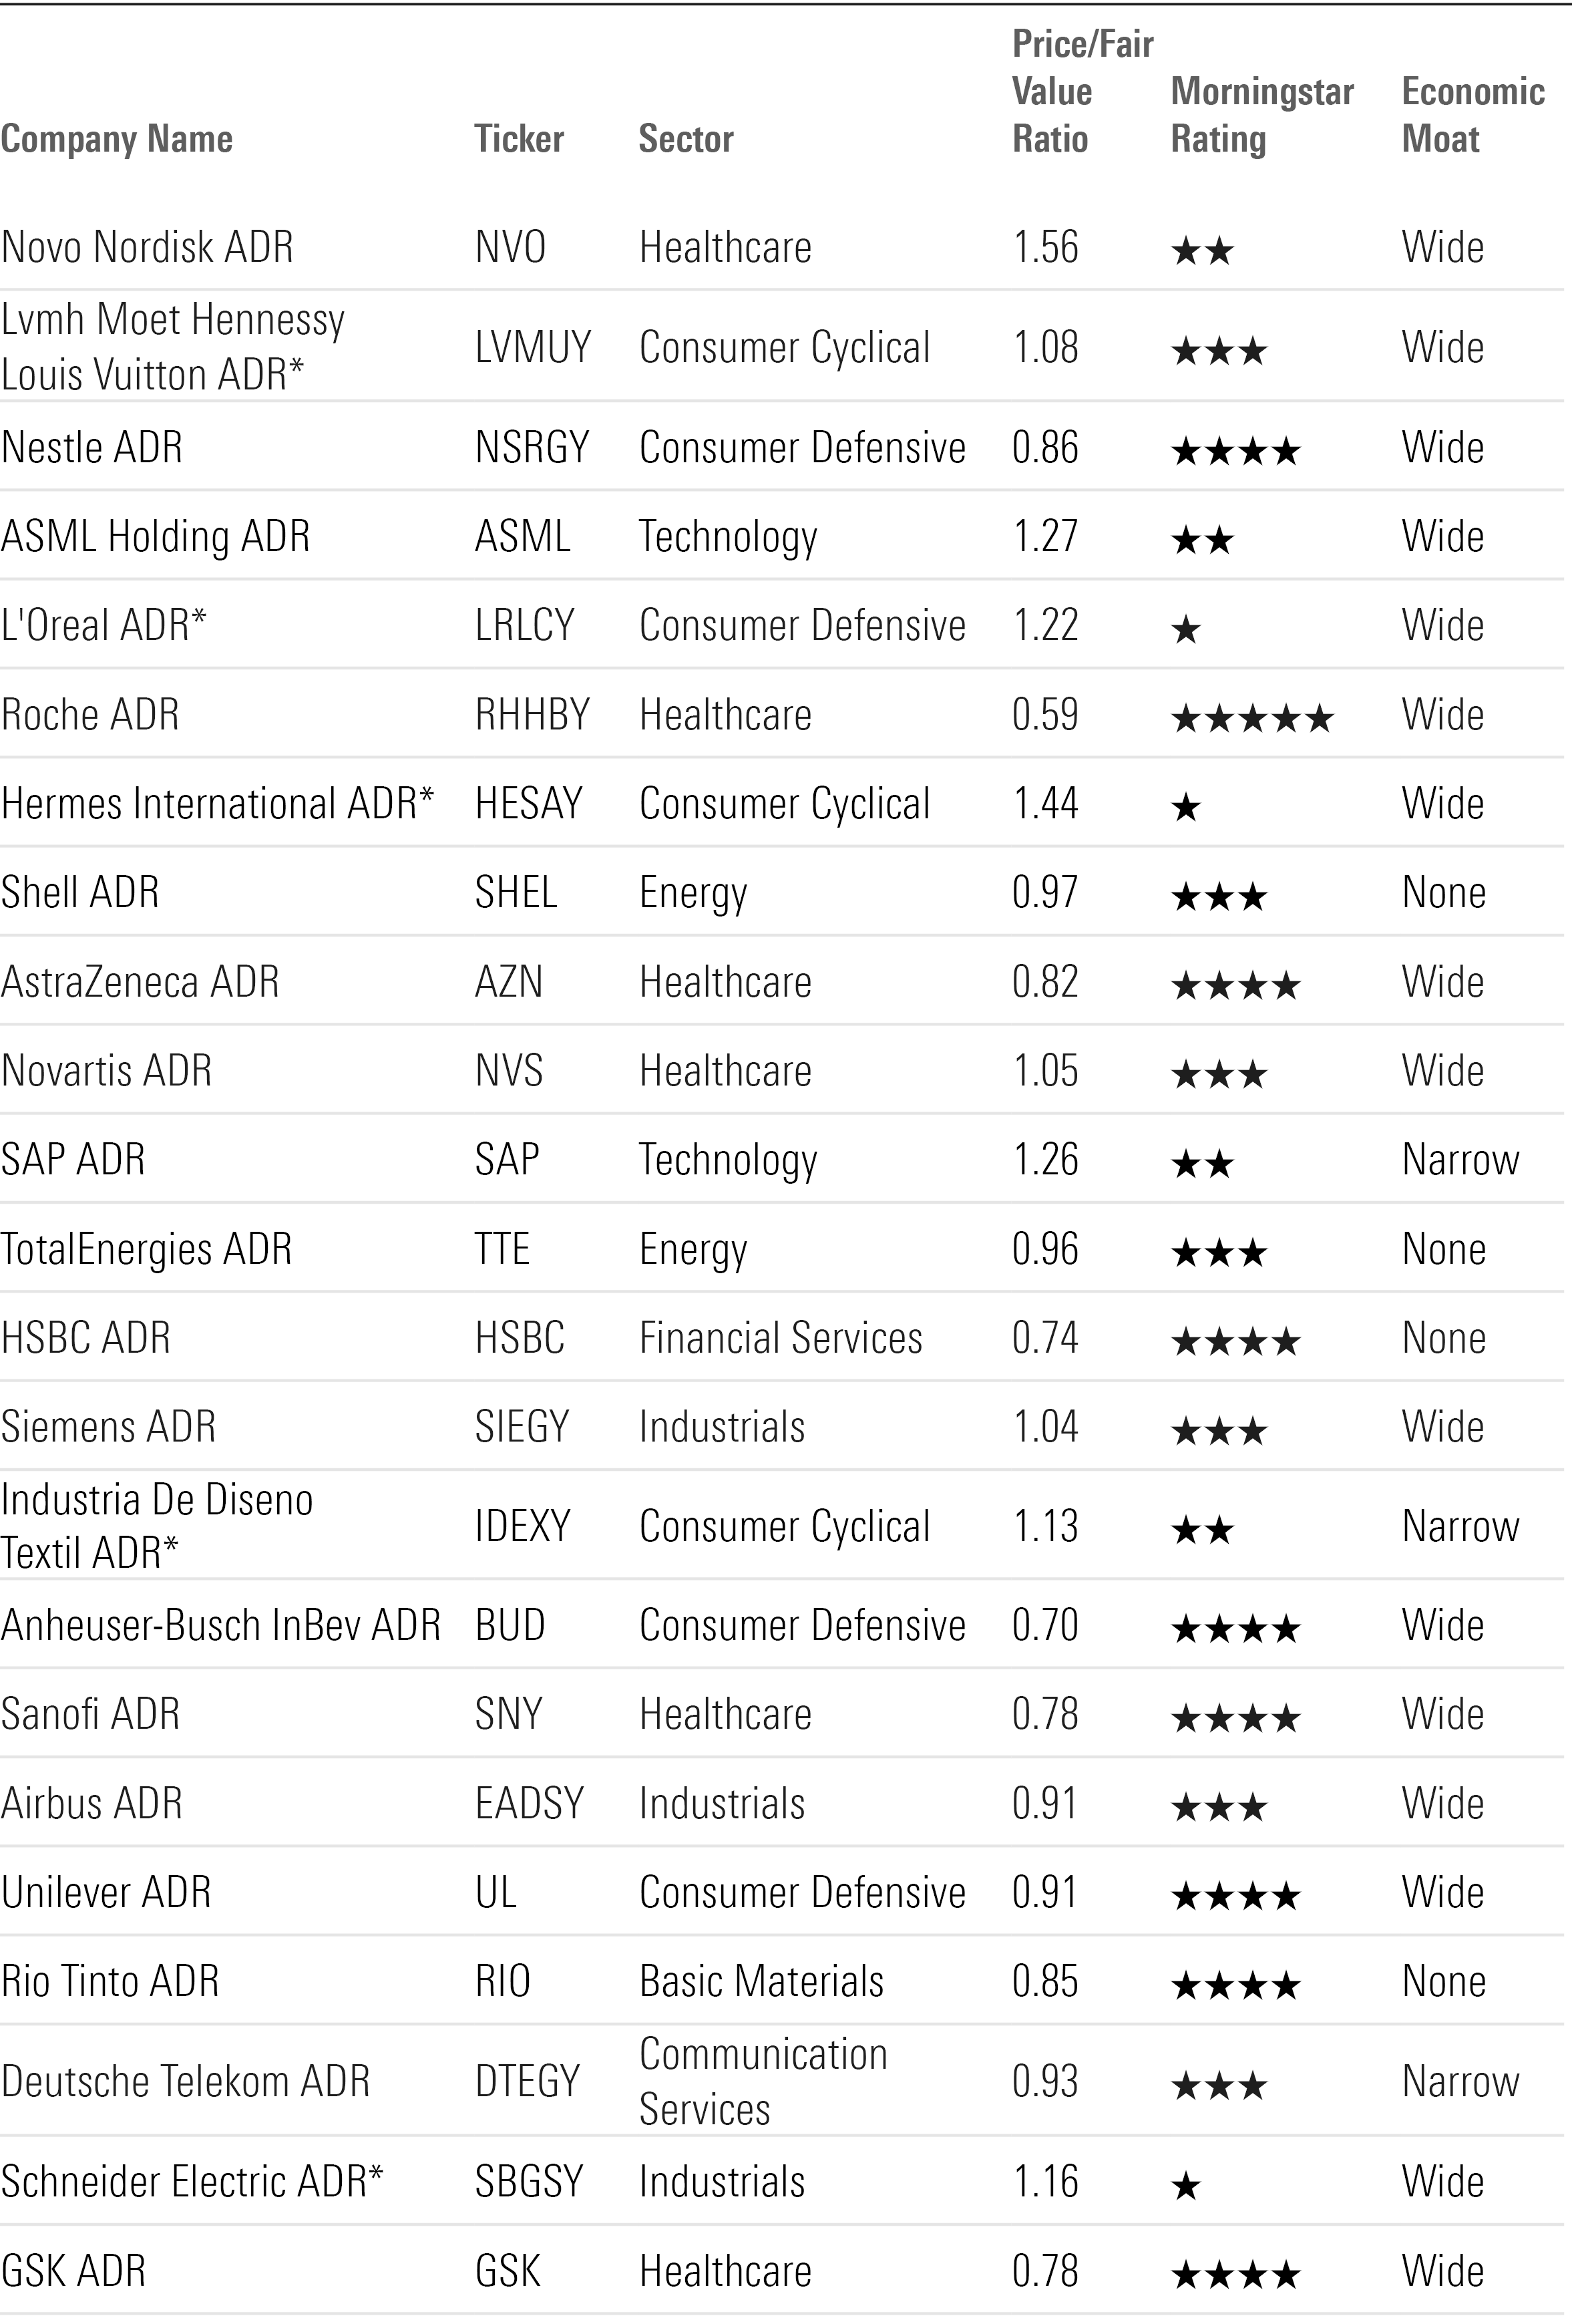 Table showing the largest stocks in Europe and Morningstar valuation measures.